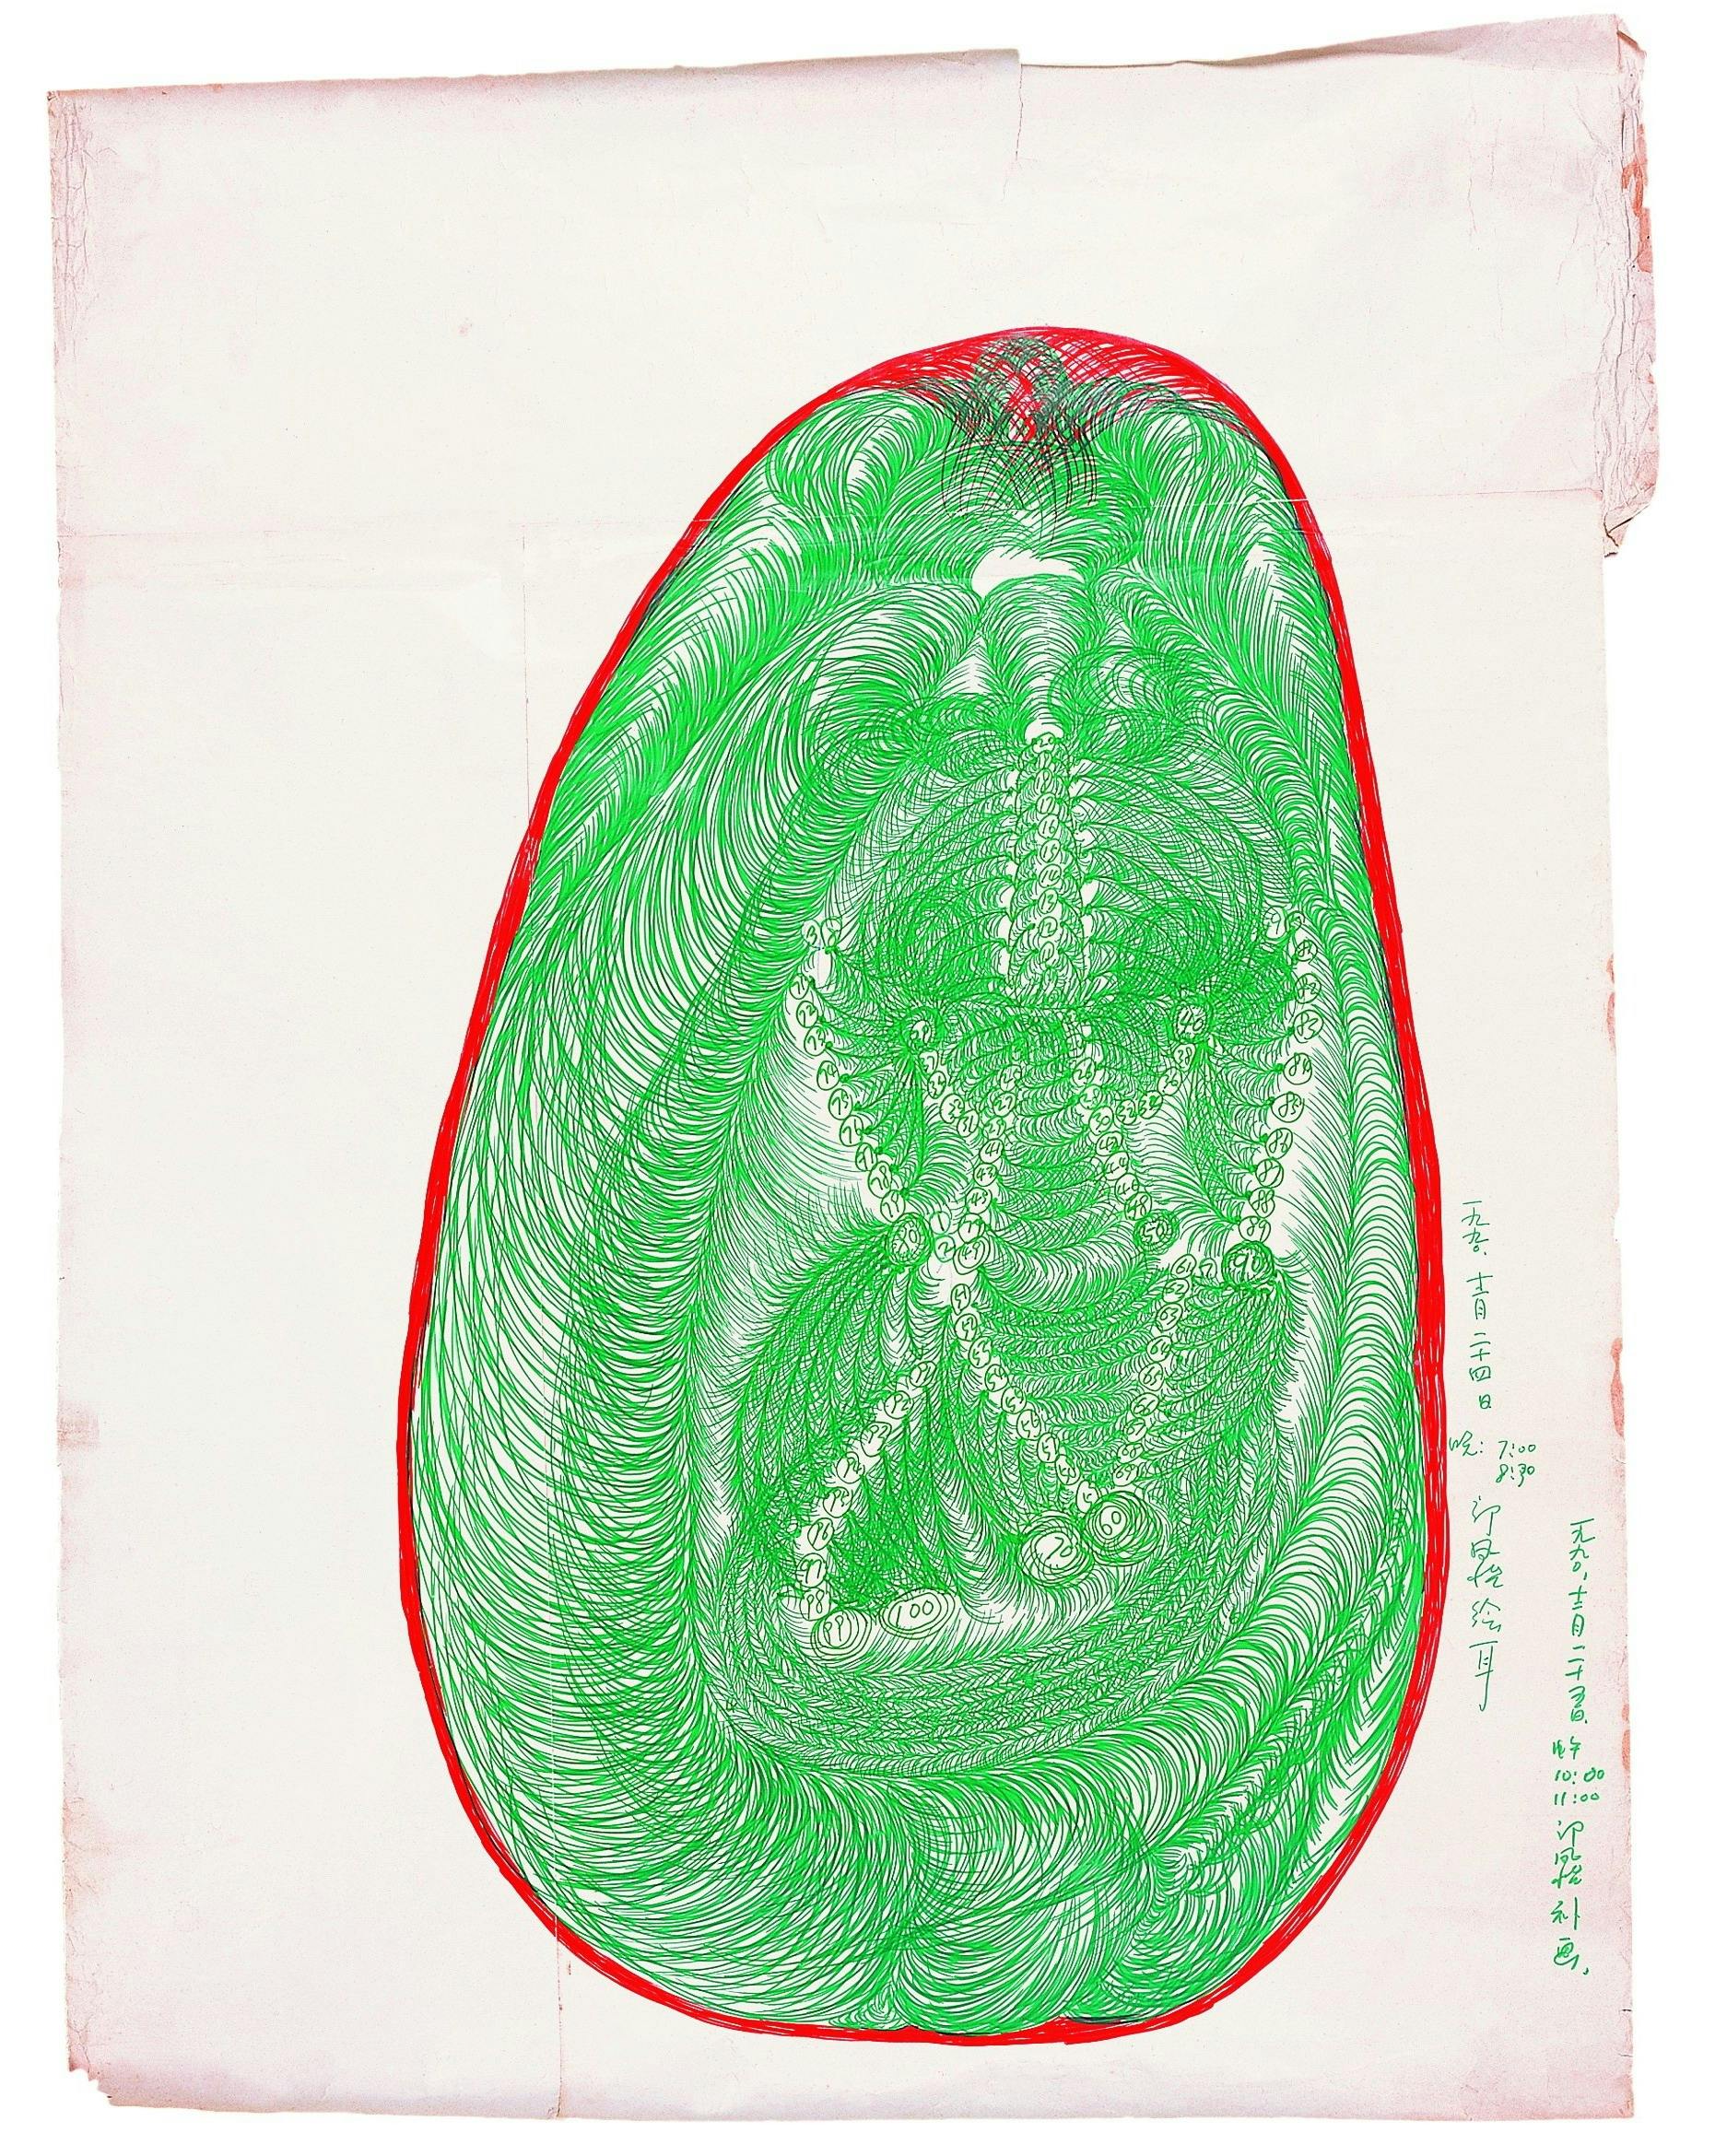 A coloured drawing by Guo Fengyi. On a white sheet of paper is a drawn figure resembling a green microbe with a soft, round form. A thick, red line outlines the figure.